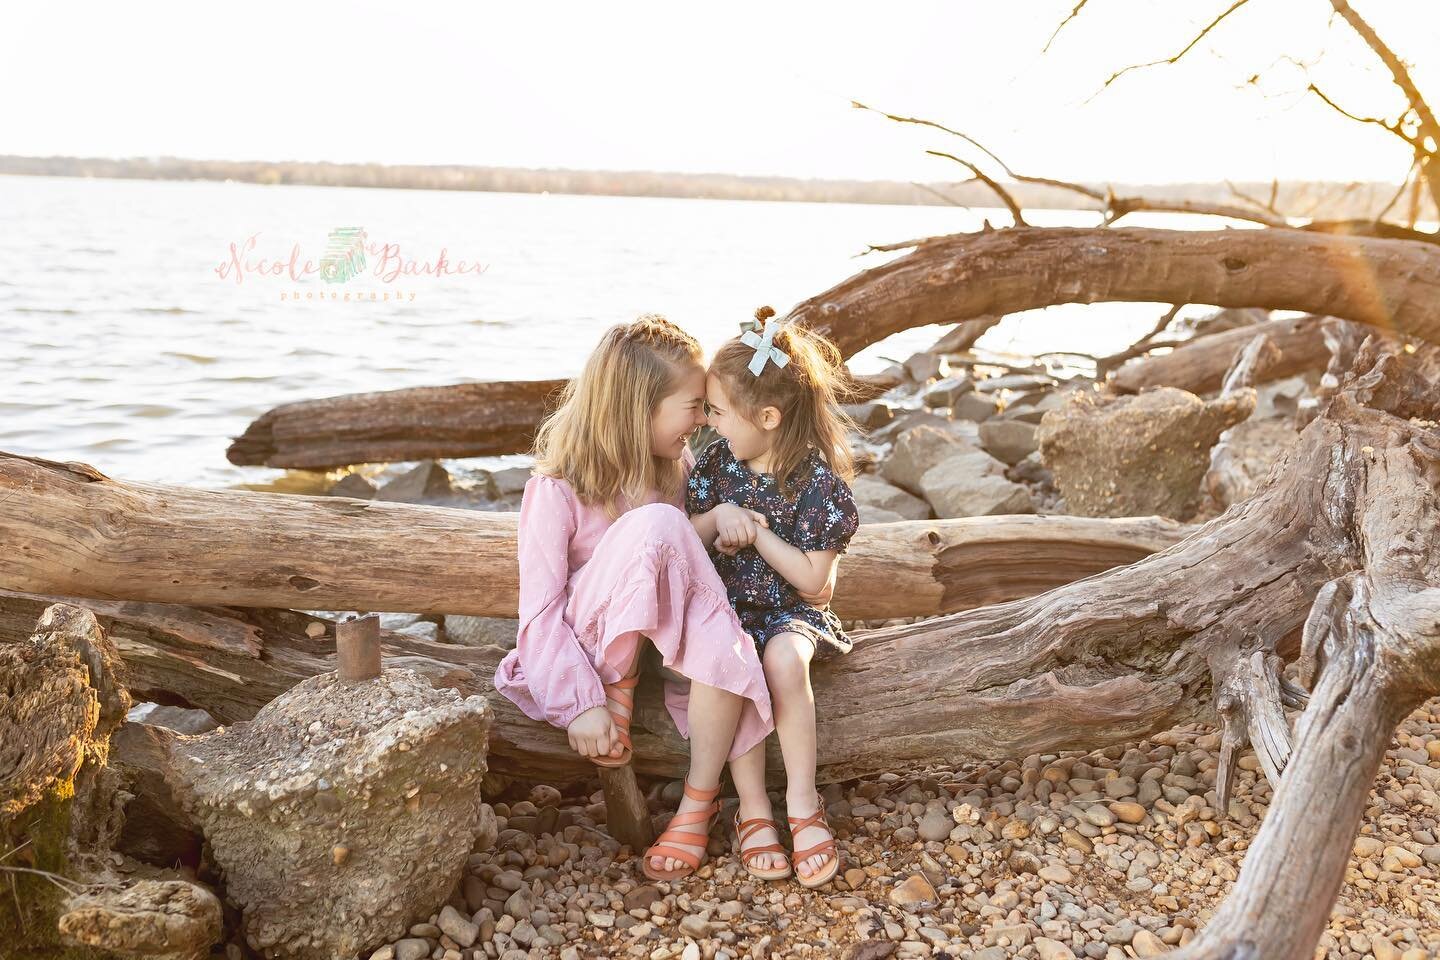 This entire session was dreamy 😍. How could it not be with these darling little girls!!!!
.
.
.
#familysessions #familyphotography #familyphotographer #childrensphotographer #kids #sisters #siblings #nova #dc #washingtondc #alexandria #arlington #ph